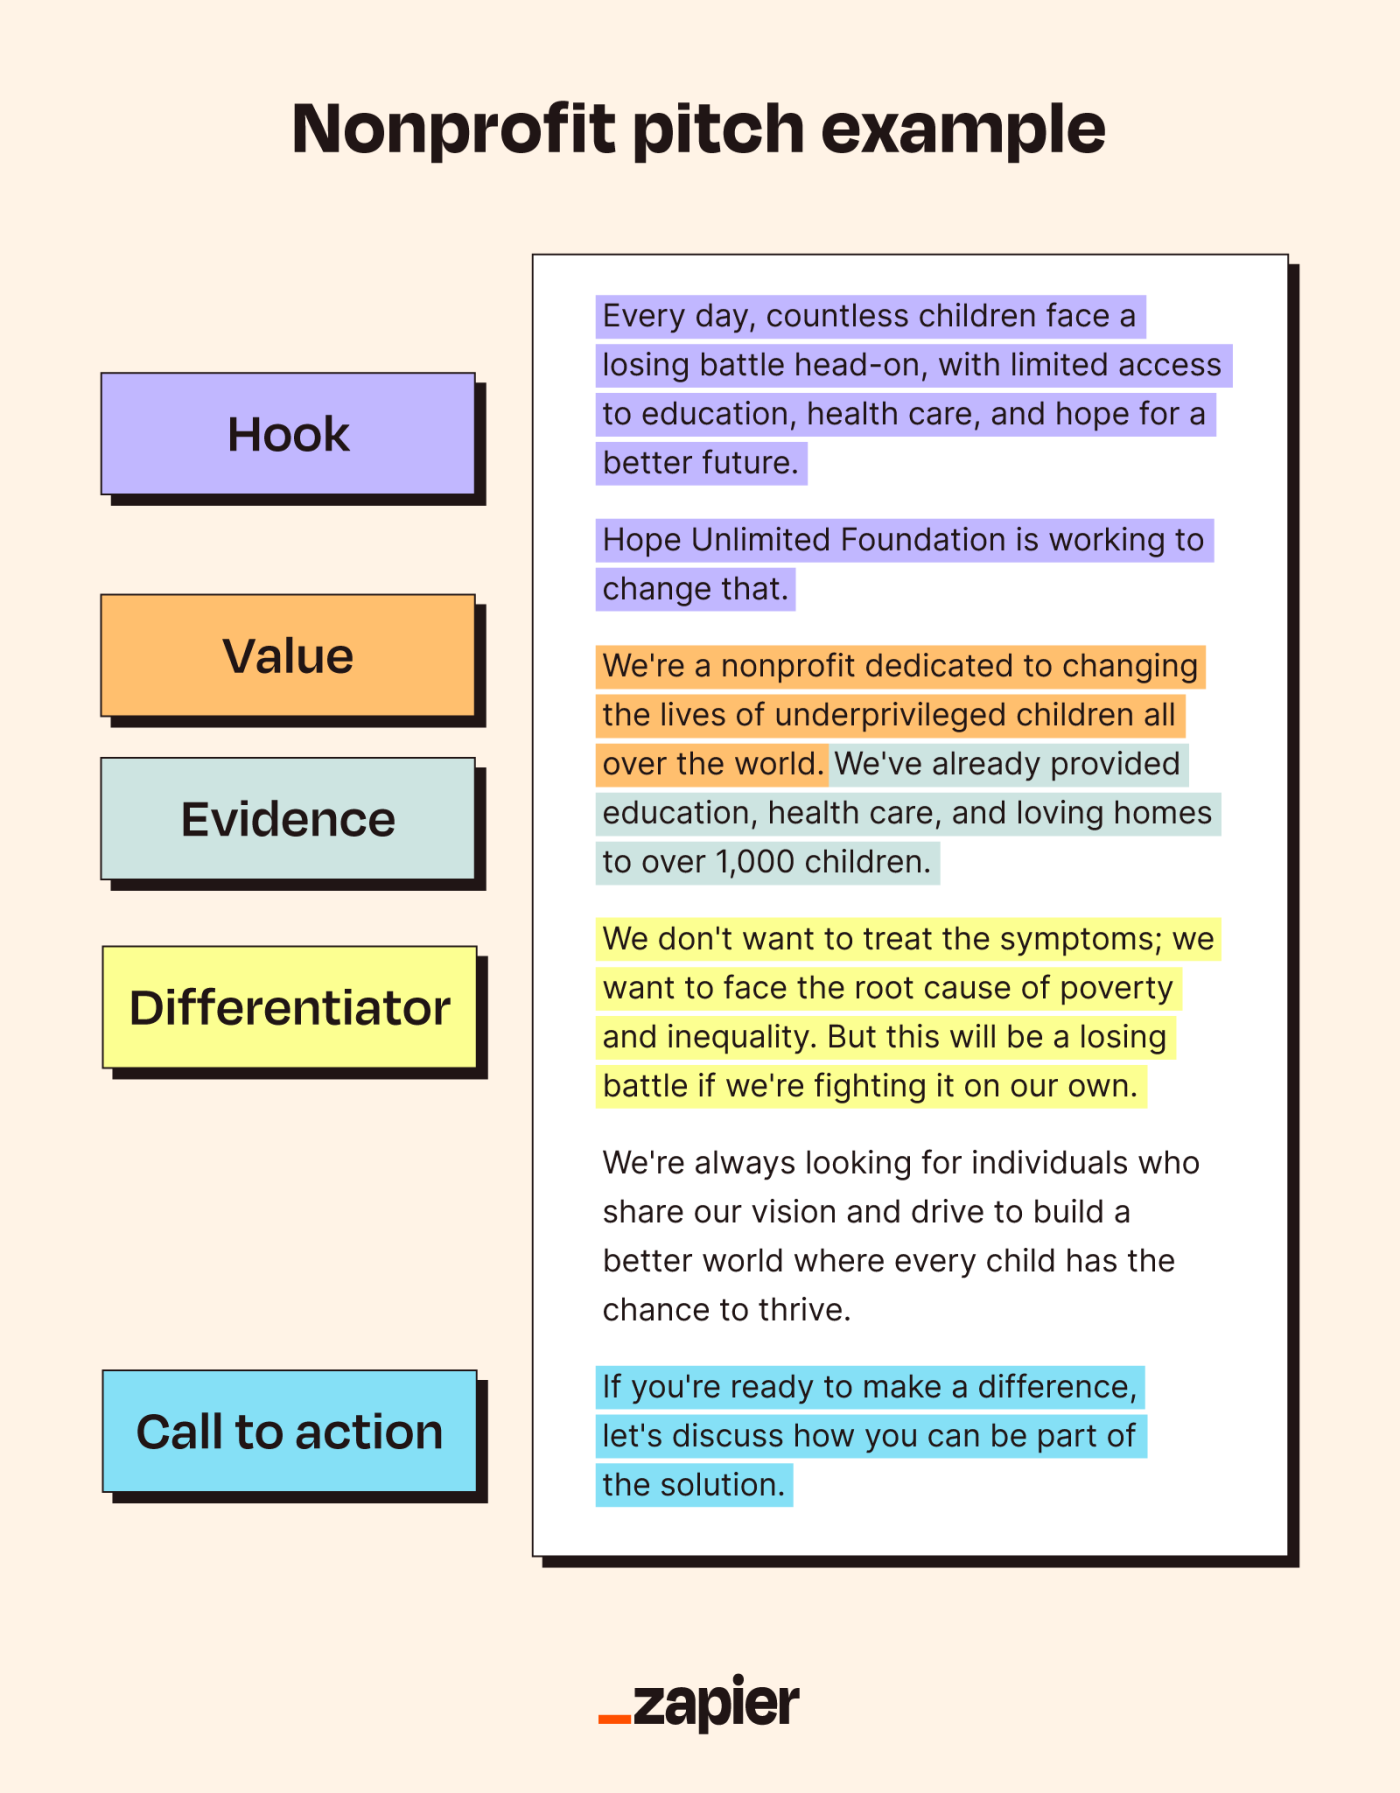 Colorful nonprofit pitch example for Hope Unlimited Foundation